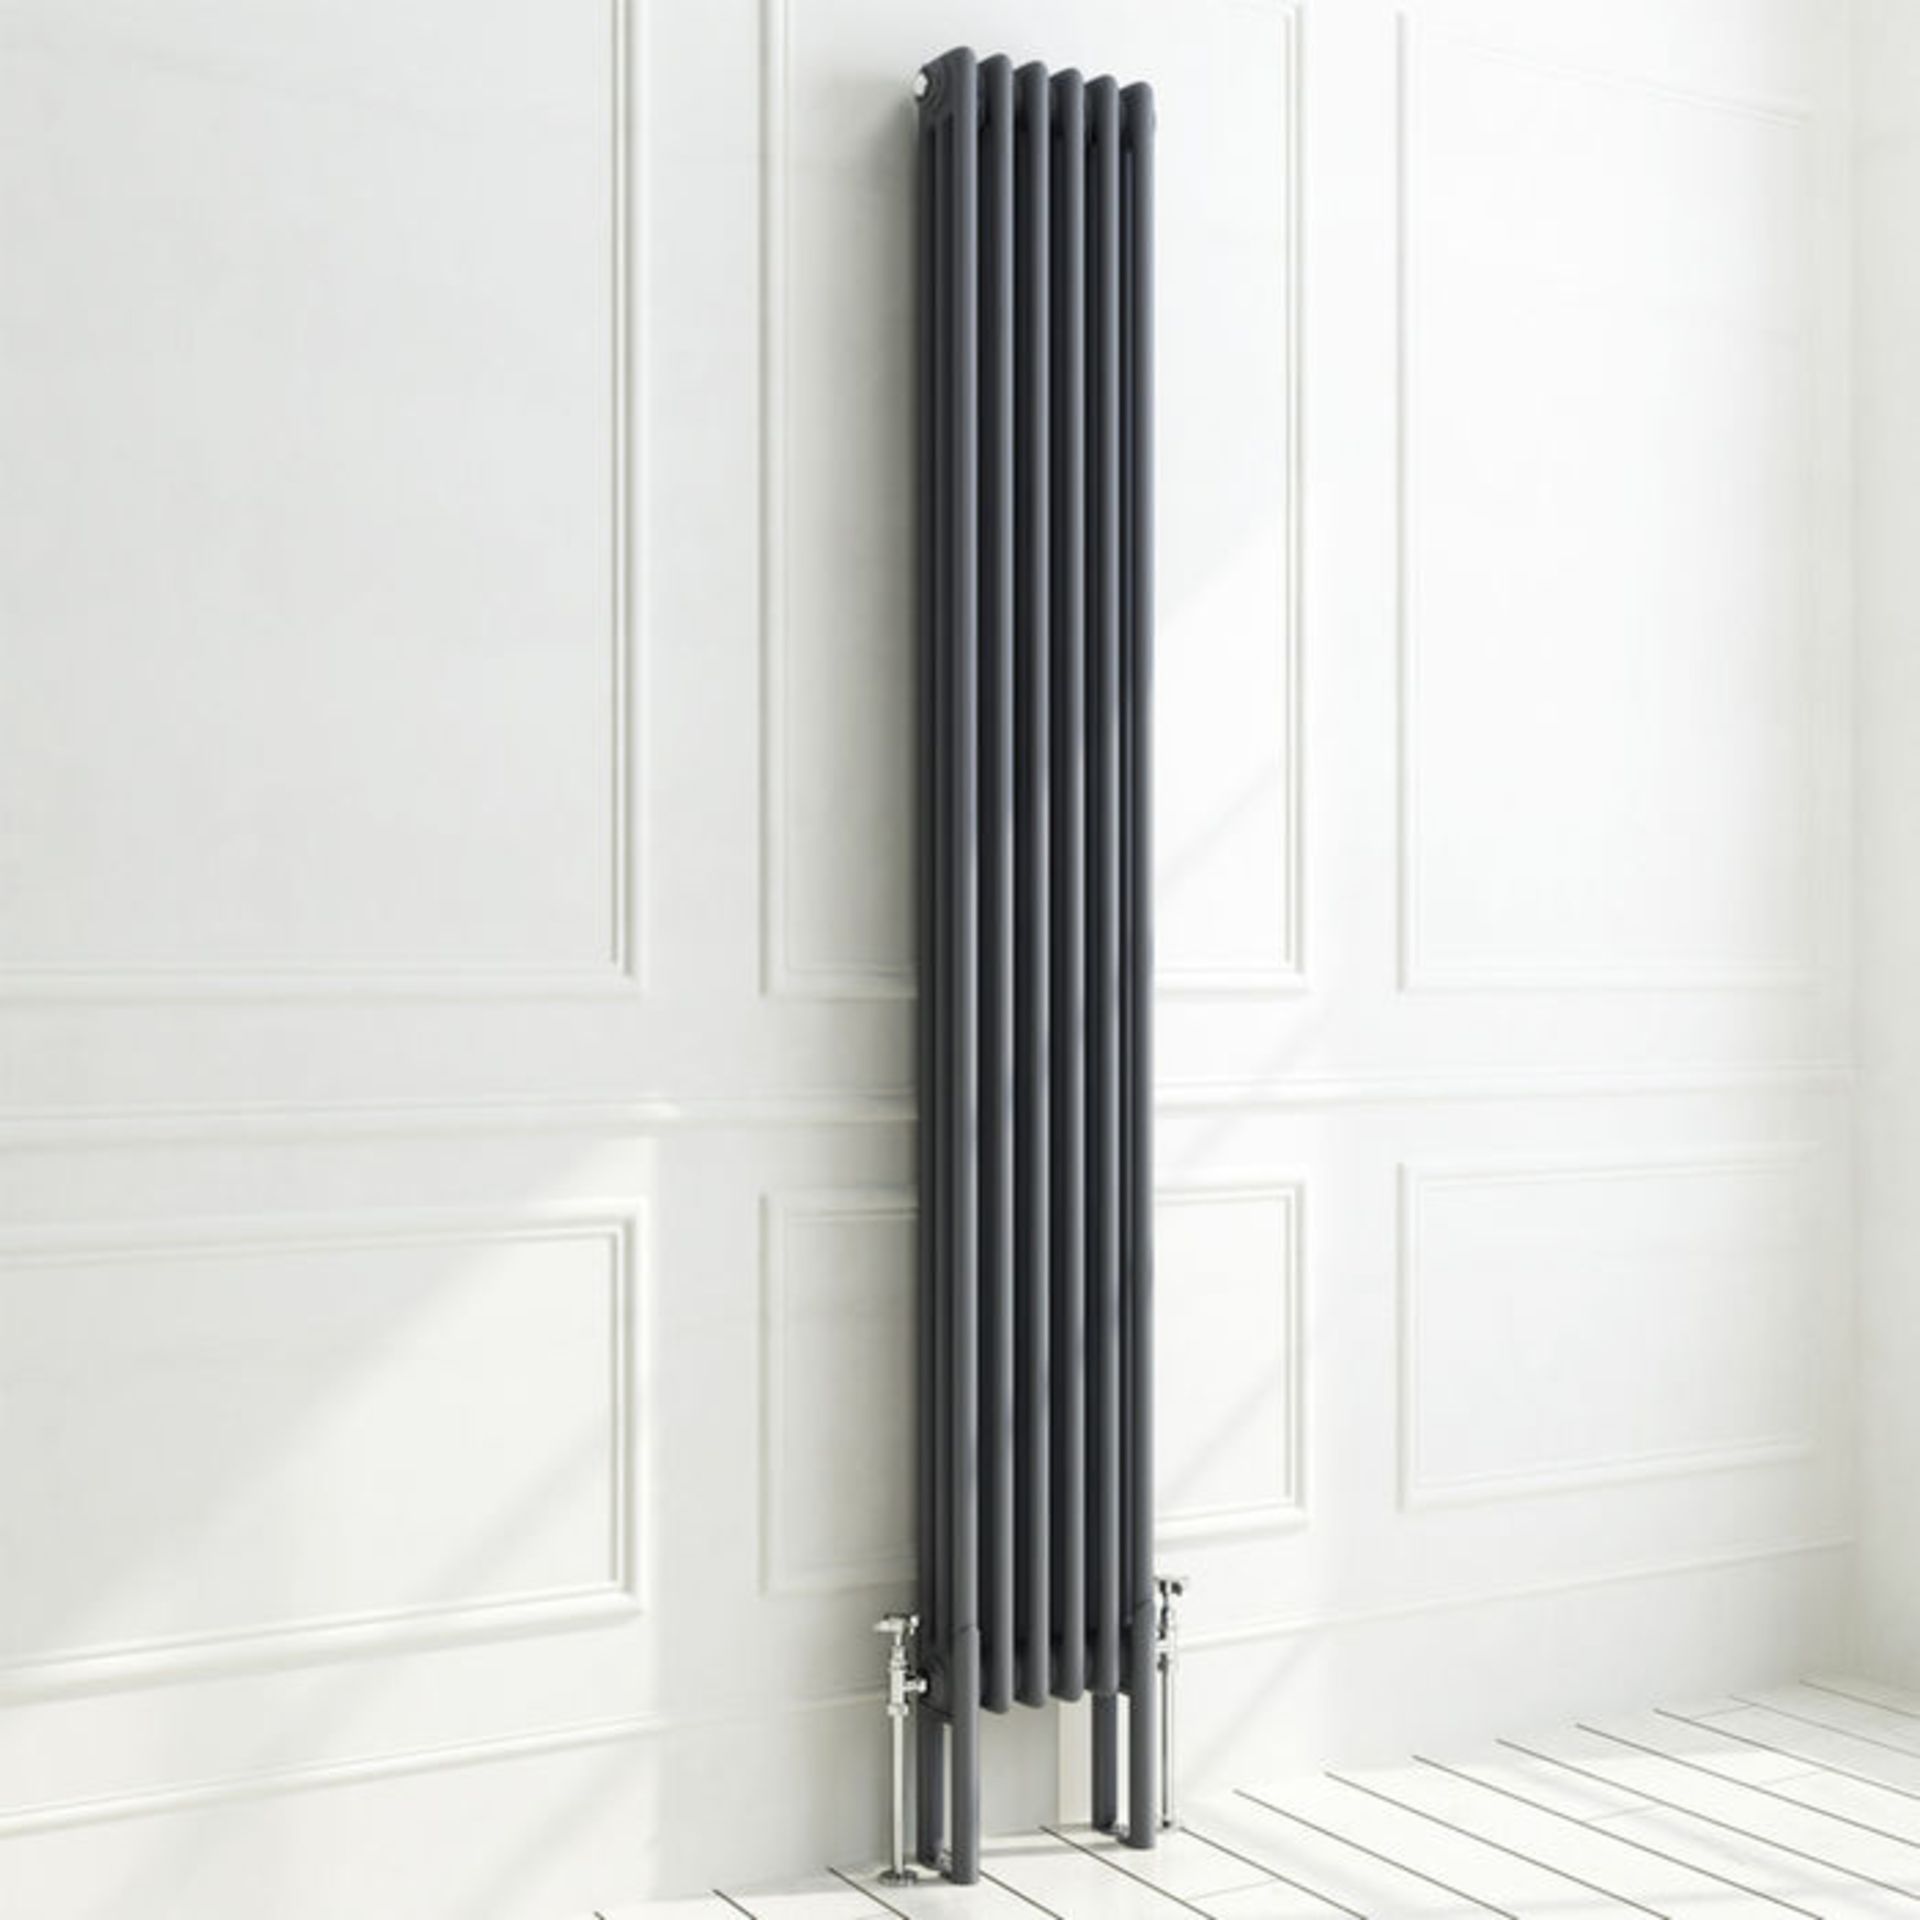 (DK128) 1800x290mm Anthracite Triple Panel Vertical Colosseum Traditional Radiator. RRP £430.99. - Image 2 of 4